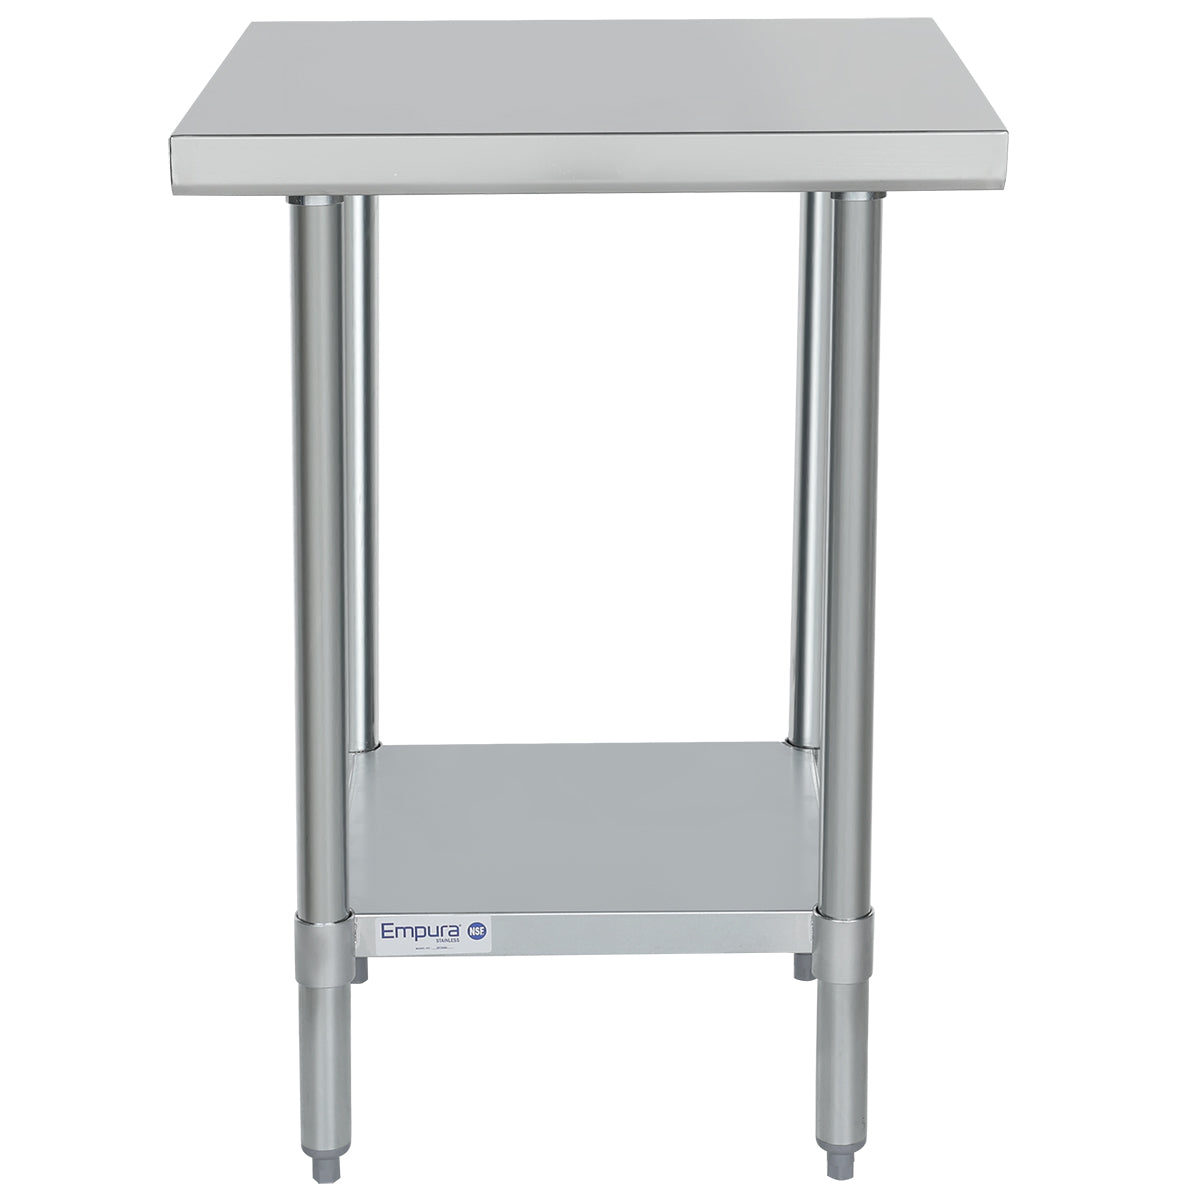 Empura 24" x 24" 18-Gauge 304 Stainless Steel Commercial Work Table with Flat Top Galvanized Legs and Undershelf